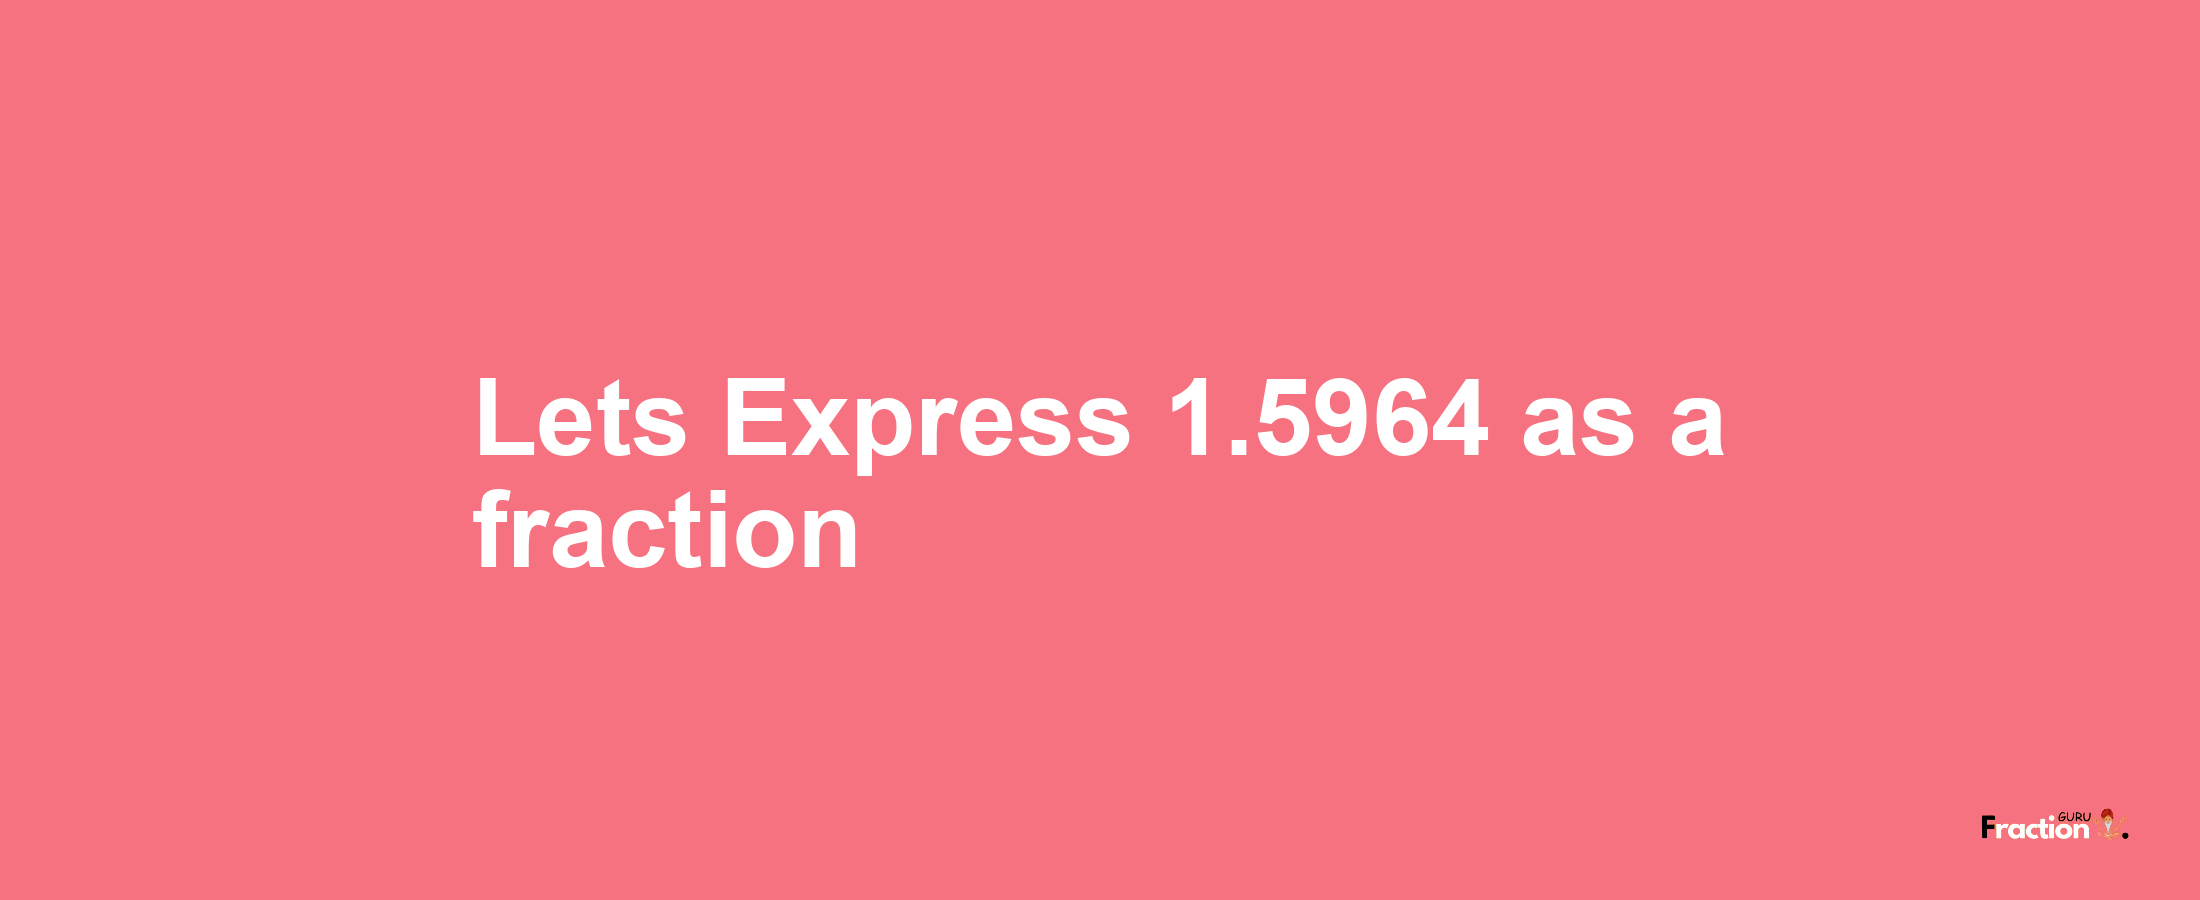 Lets Express 1.5964 as afraction